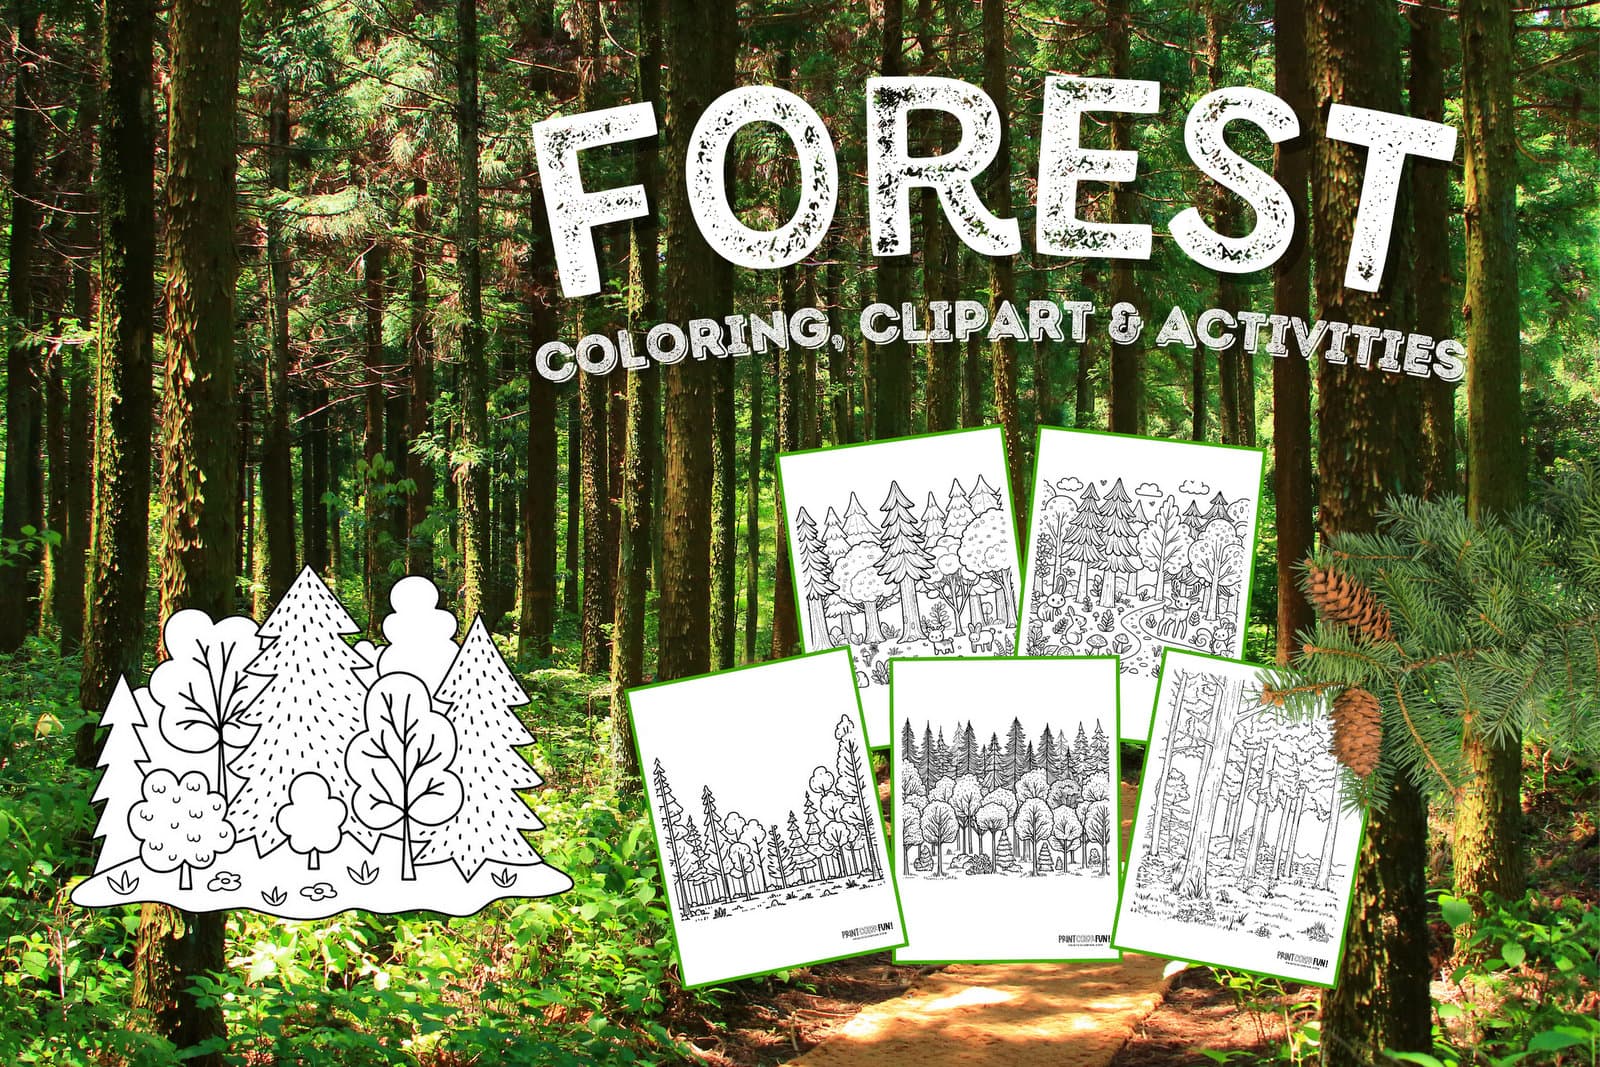 Forests and trees coloring page clipart activities from PrintColorFun com